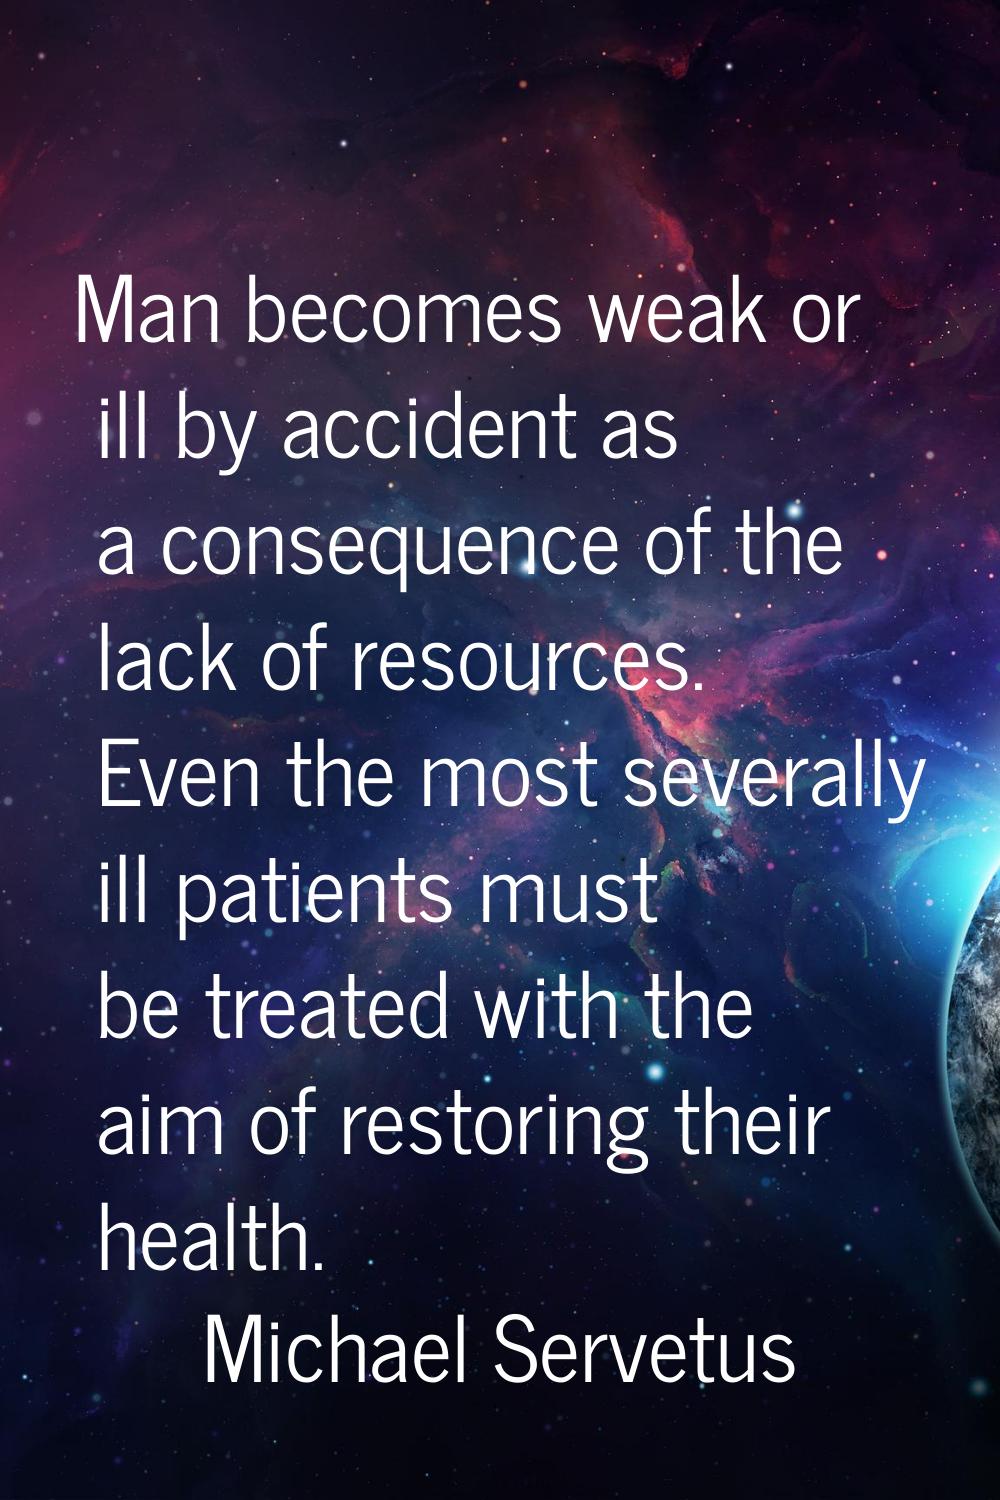 Man becomes weak or ill by accident as a consequence of the lack of resources. Even the most severa